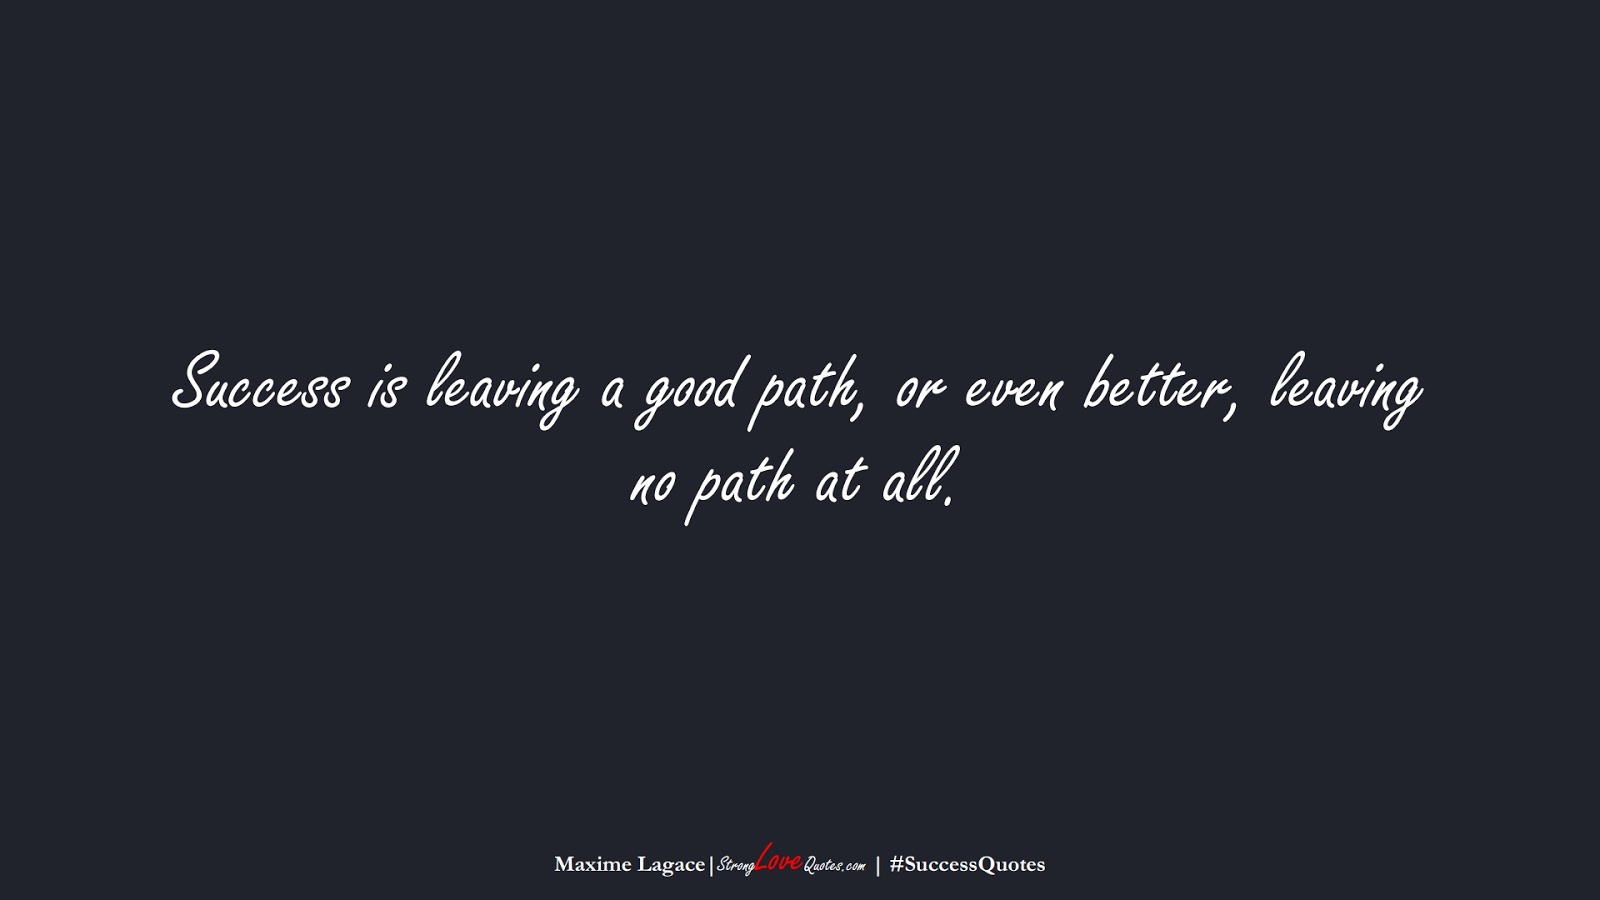 Success is leaving a good path, or even better, leaving no path at all. (Maxime Lagace);  #SuccessQuotes